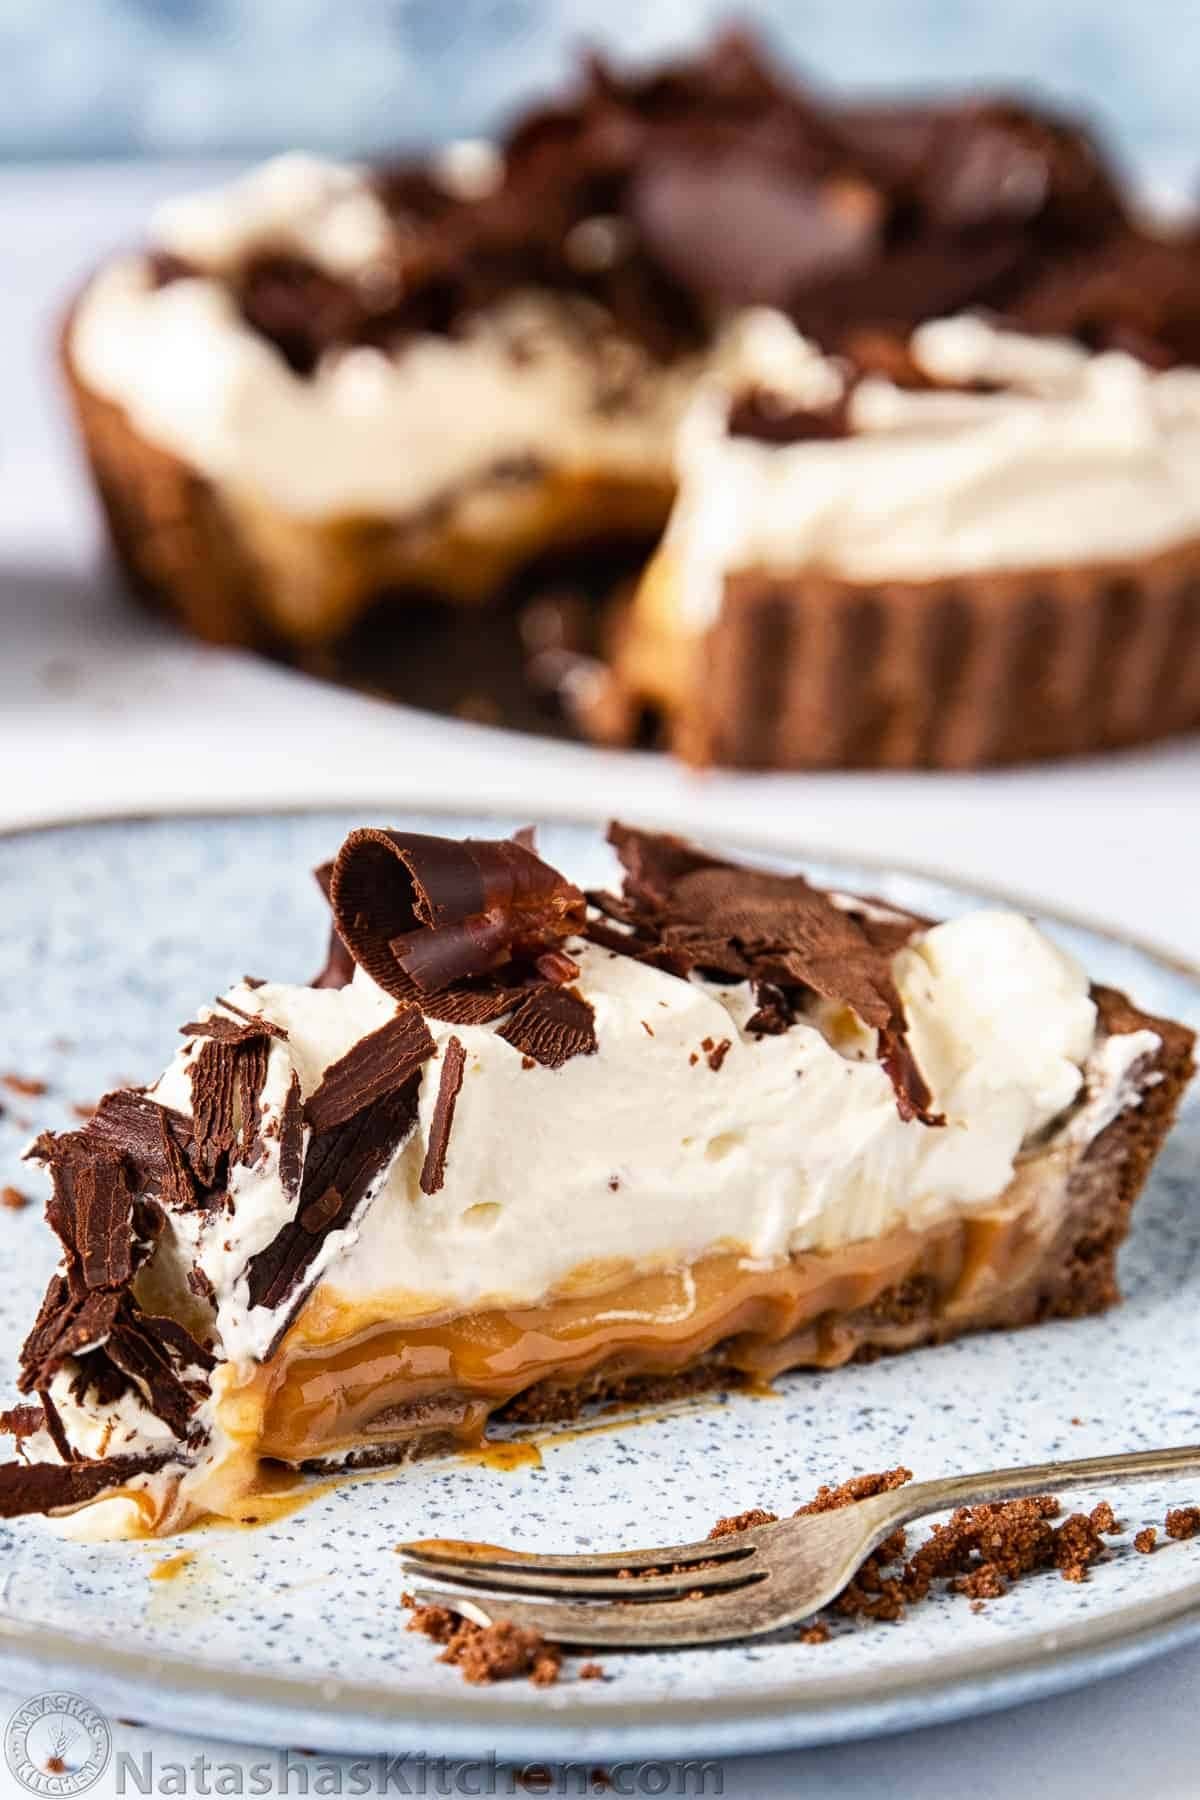 A slice of banoffee pie with layers of caramel, whipped cream and chocolate shavings on top.